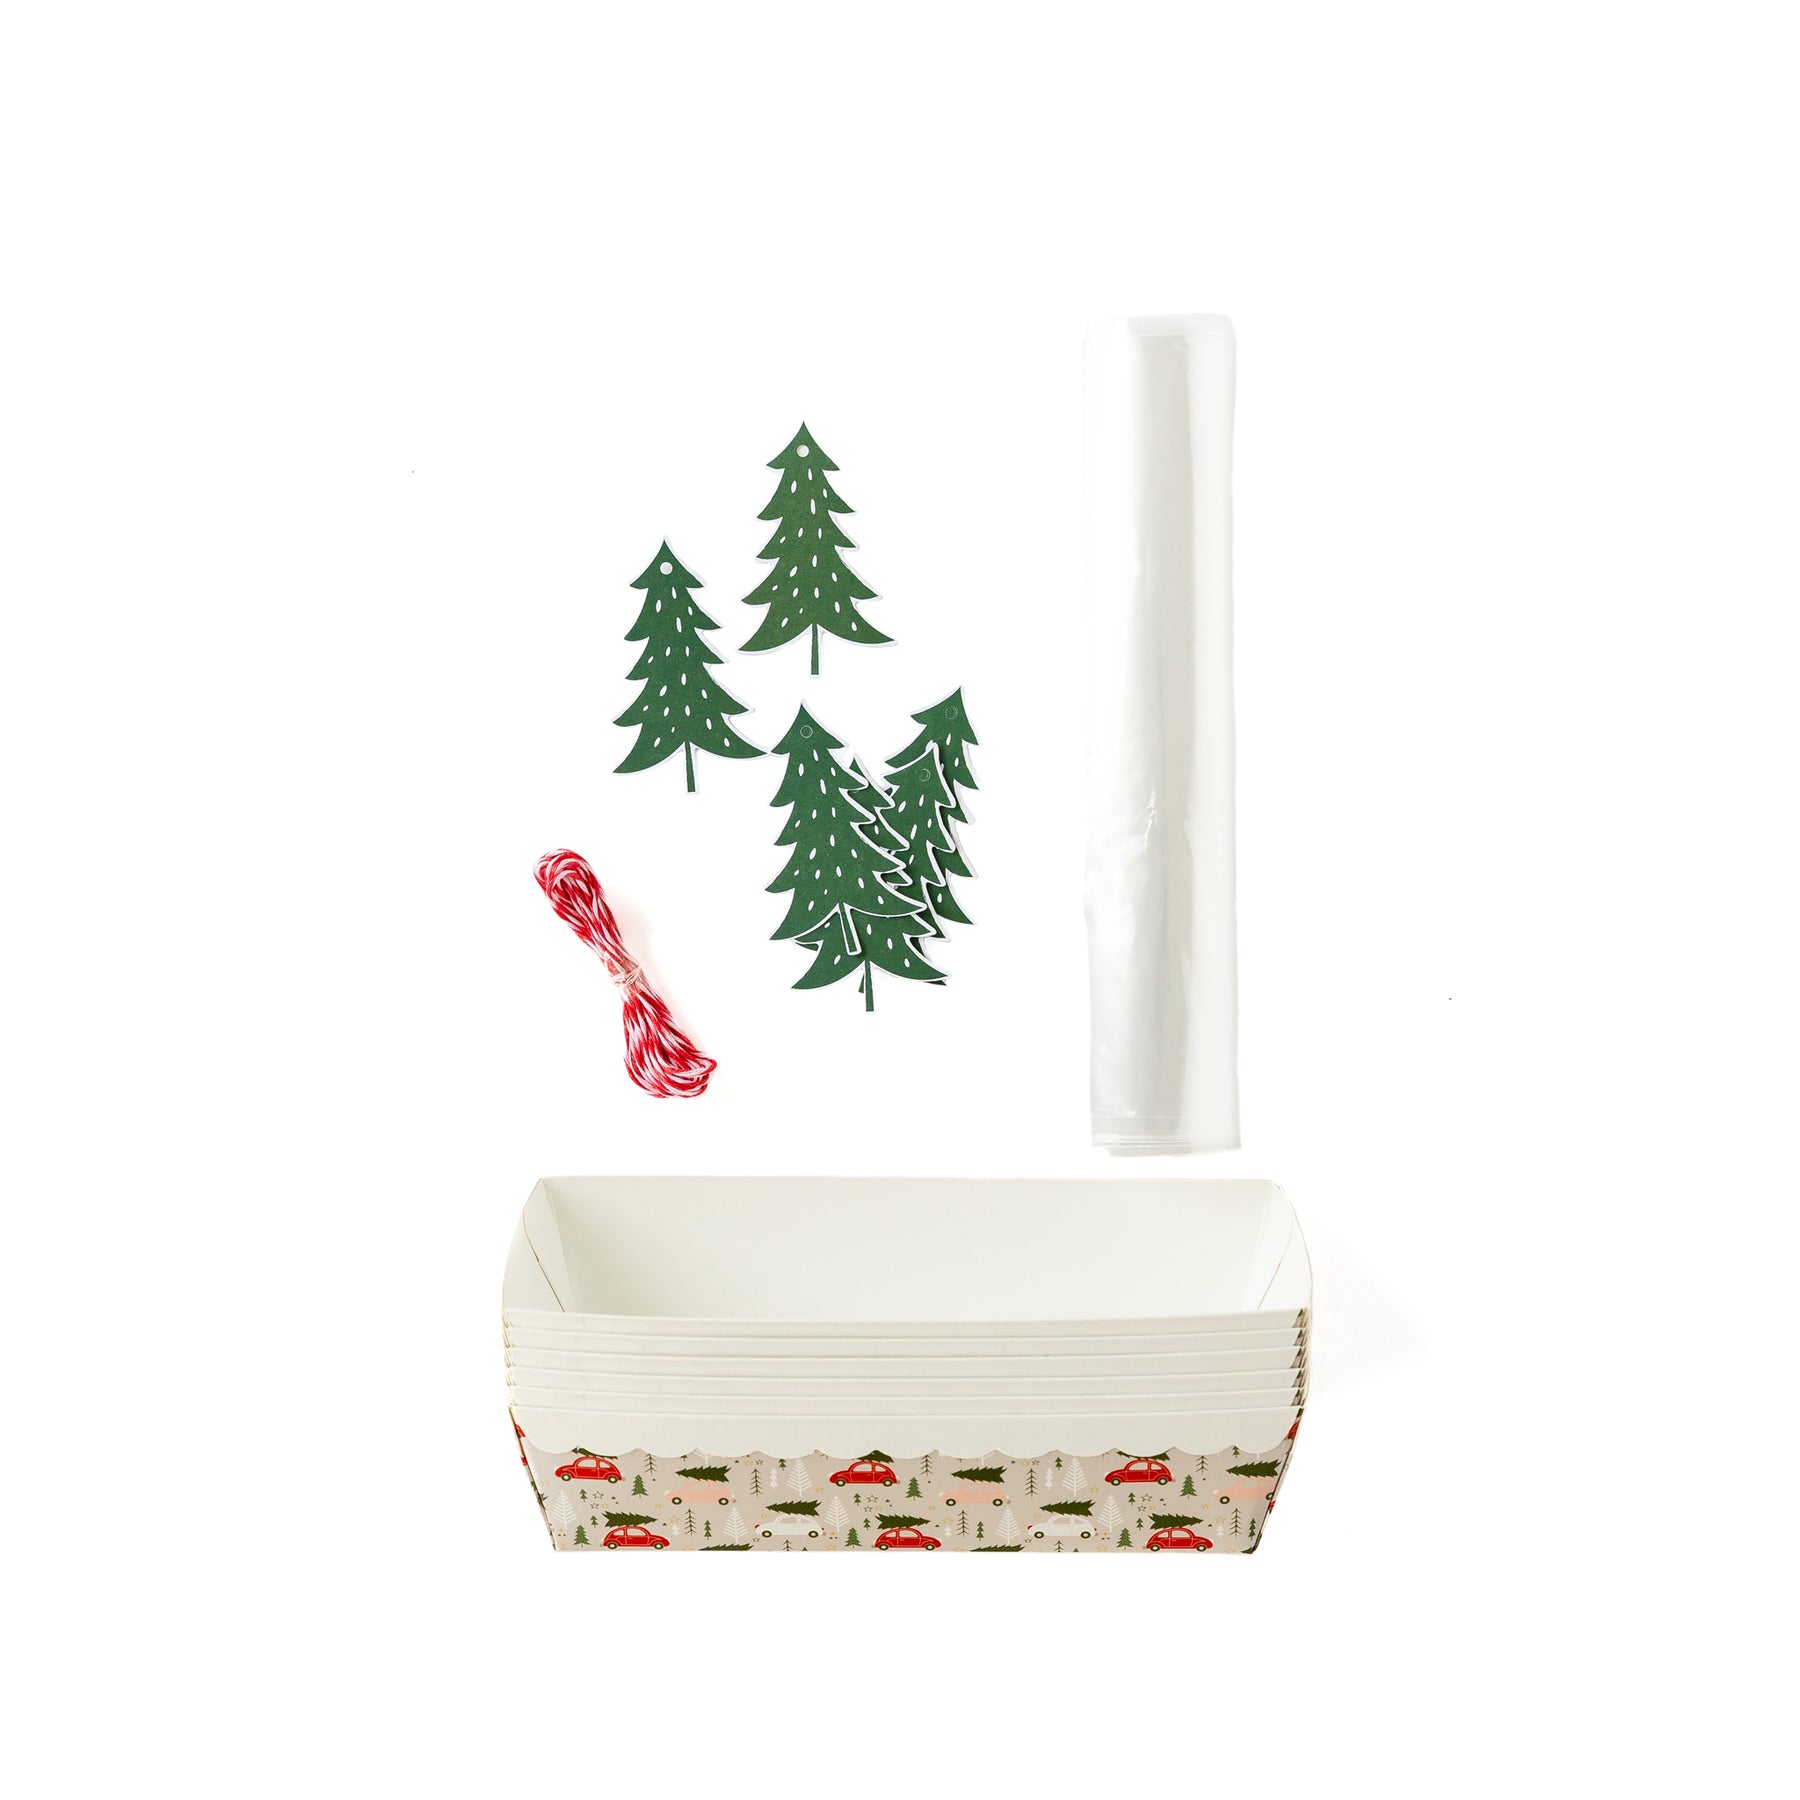 Christmas Holly Loaf Pan Set – My Mind's Eye Paper Goods